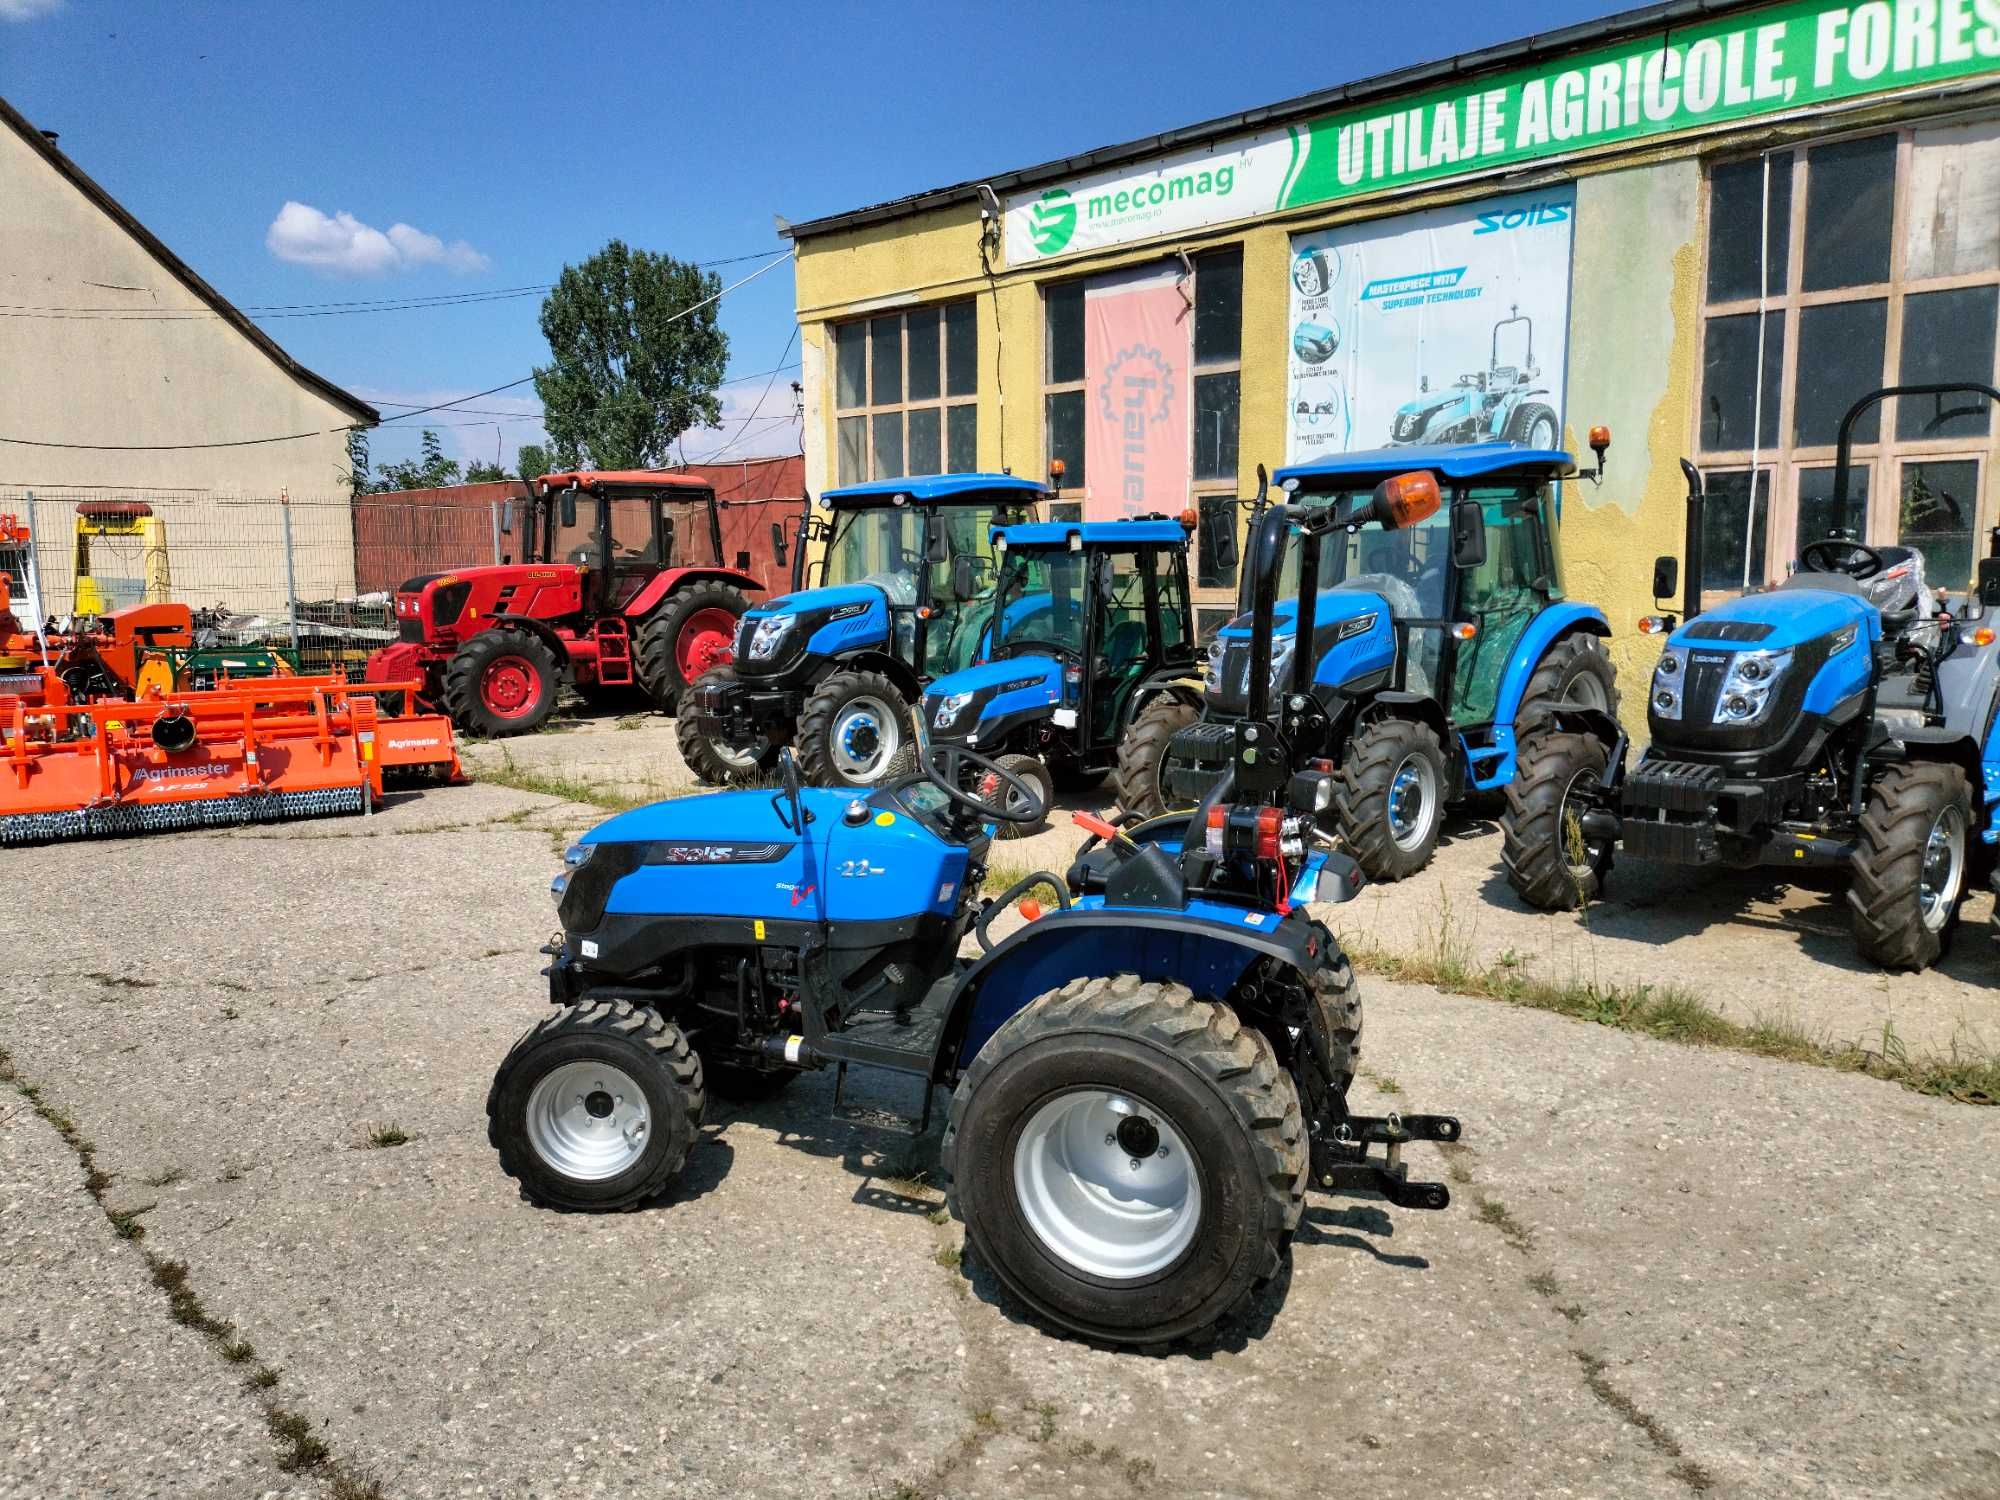 Tractor SOLIS 22 CP Agricol  Mecomag